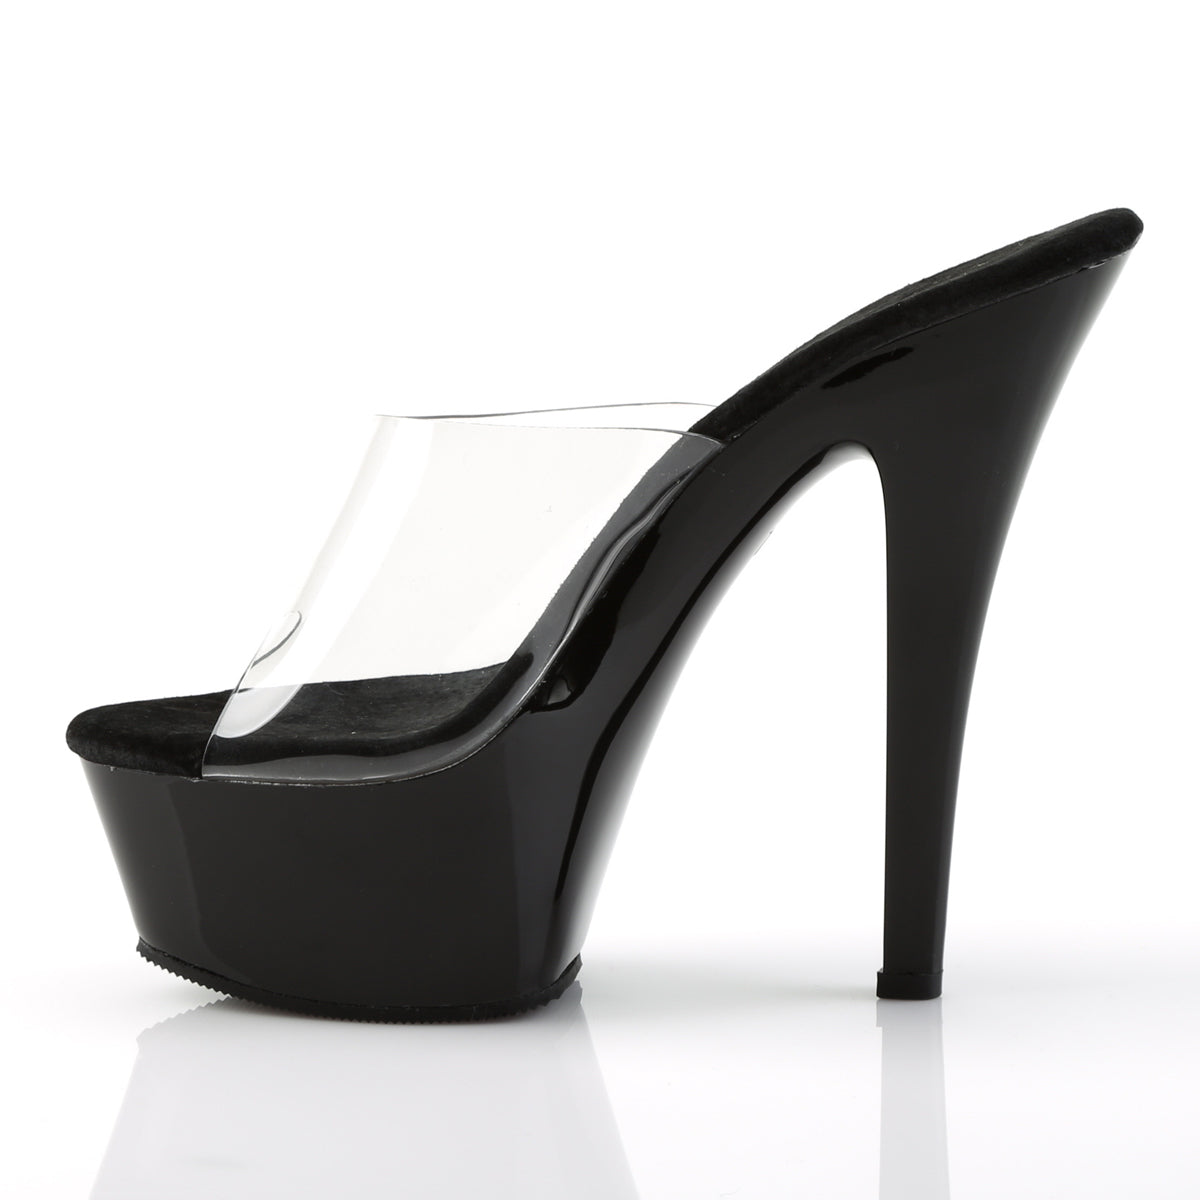 KISS-201 6" Heel Clear and Black Pole Dancing Platforms-Pleaser- Sexy Shoes Pole Dance Heels